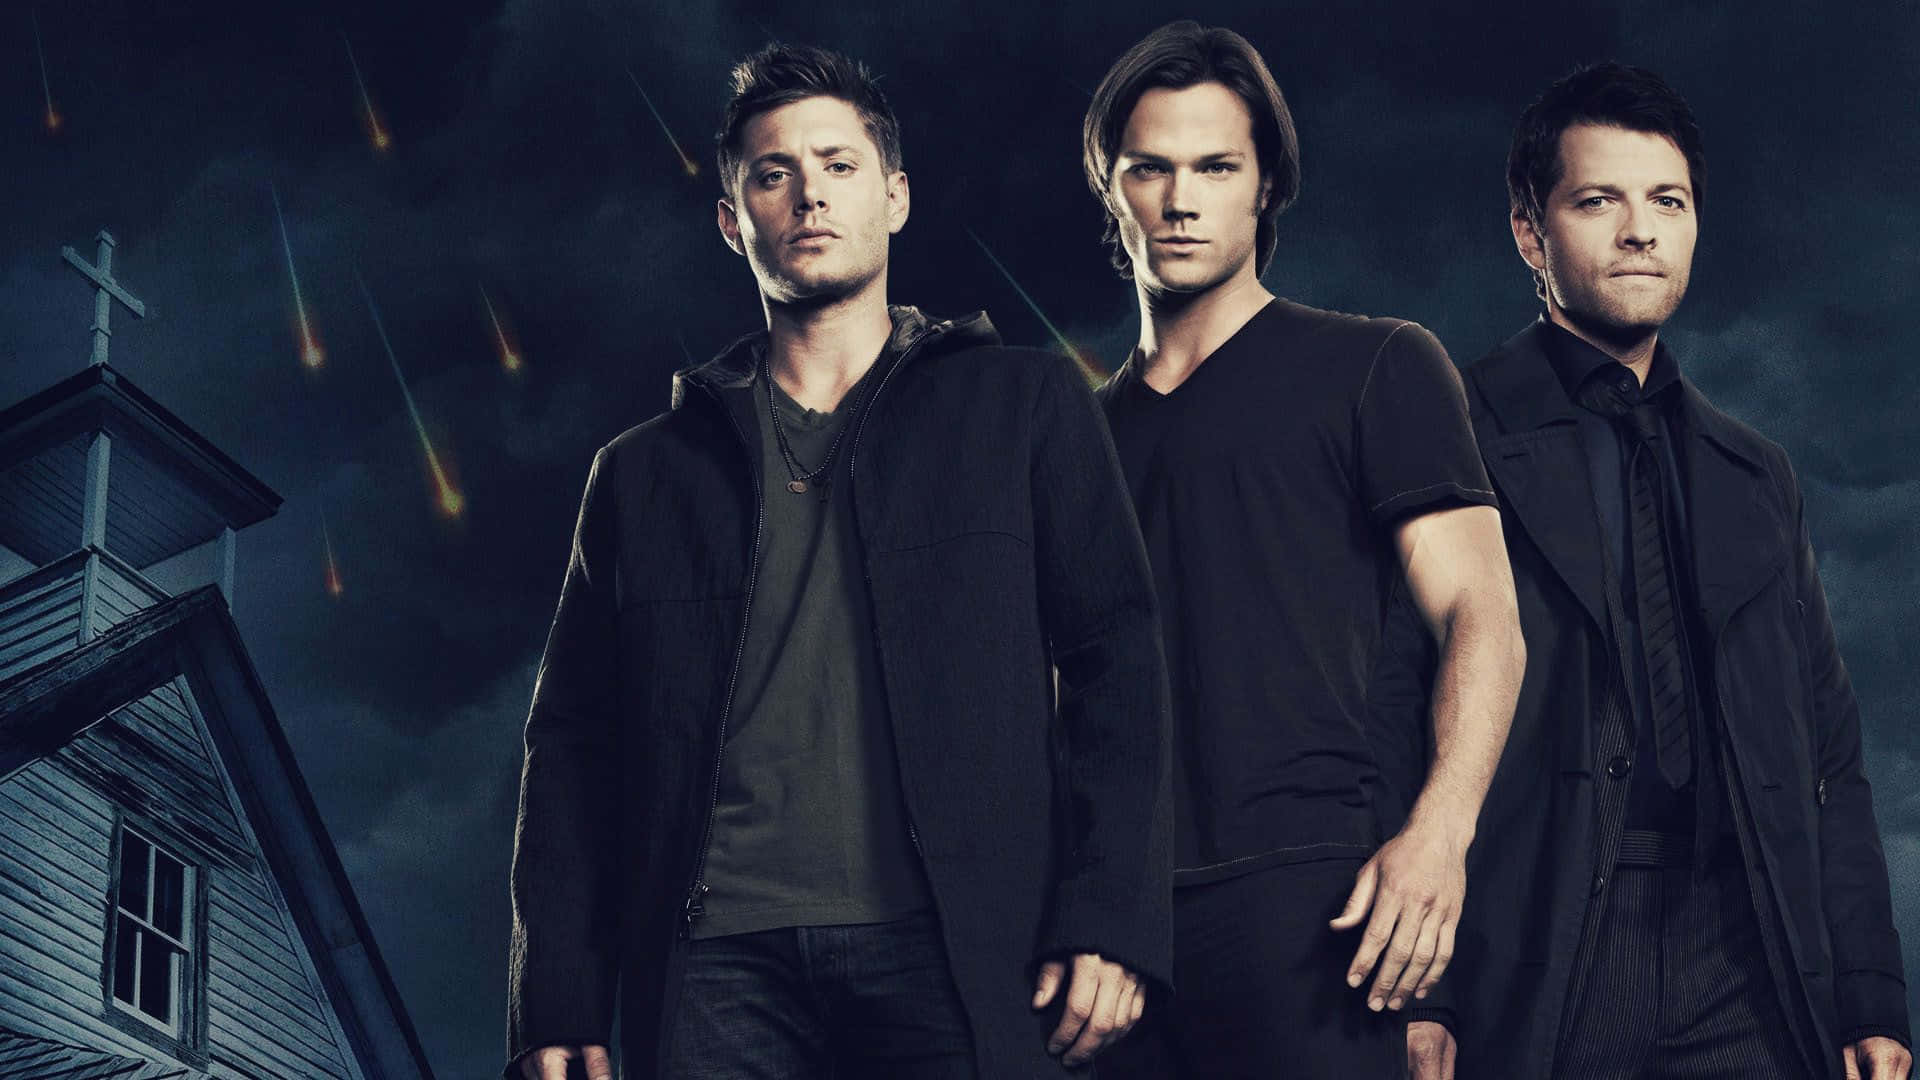 Join the fight against evil with Sam and Dean Winchester